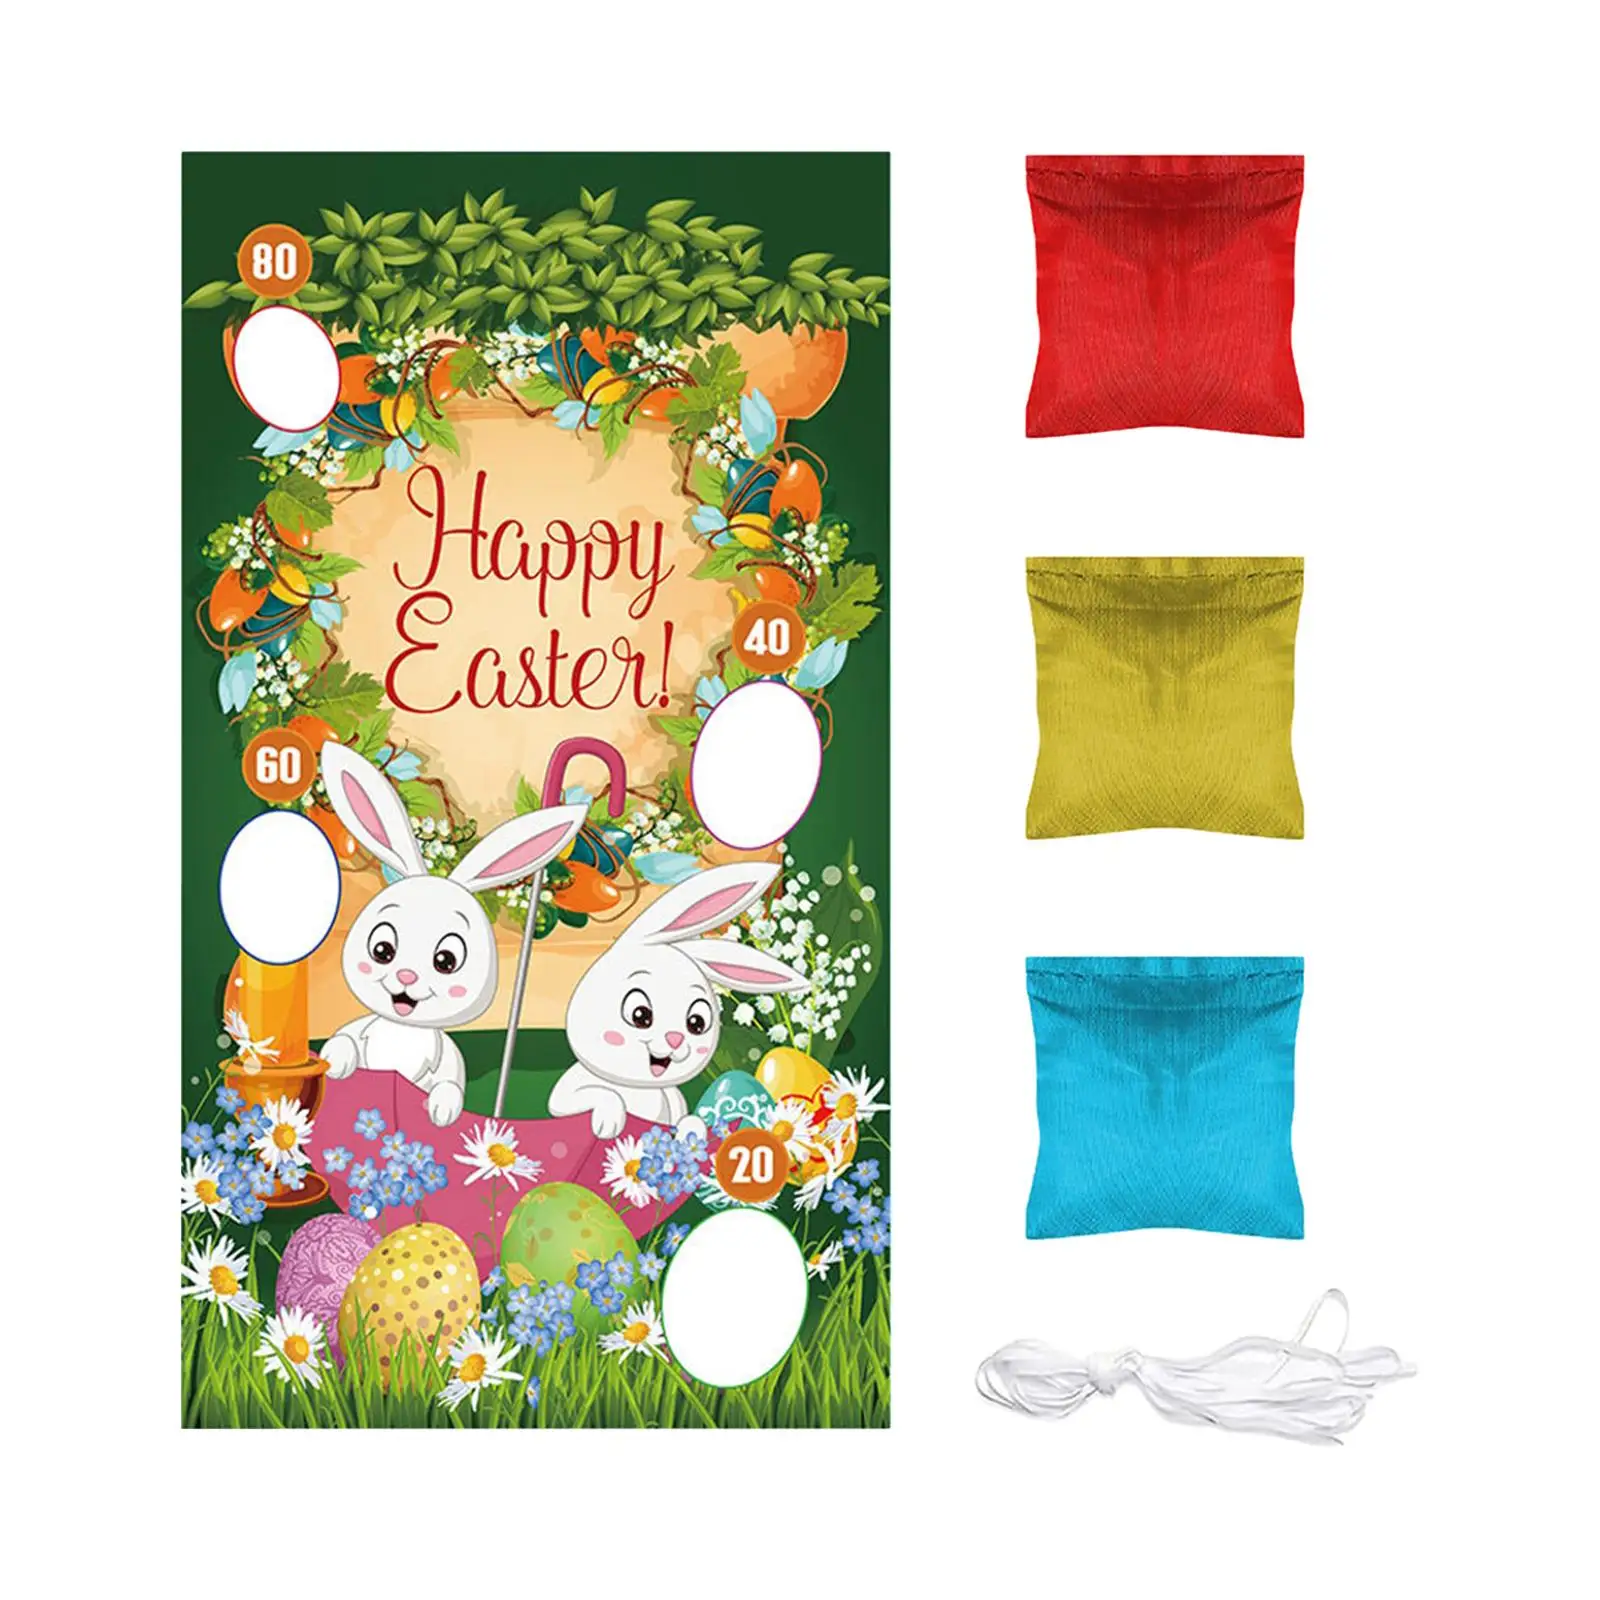 Toss Game Banner Party Favors Toys with 3 Bean Bags for Easter Decorations Easter Gifts Beach Indoor and Outdoor Camping Games